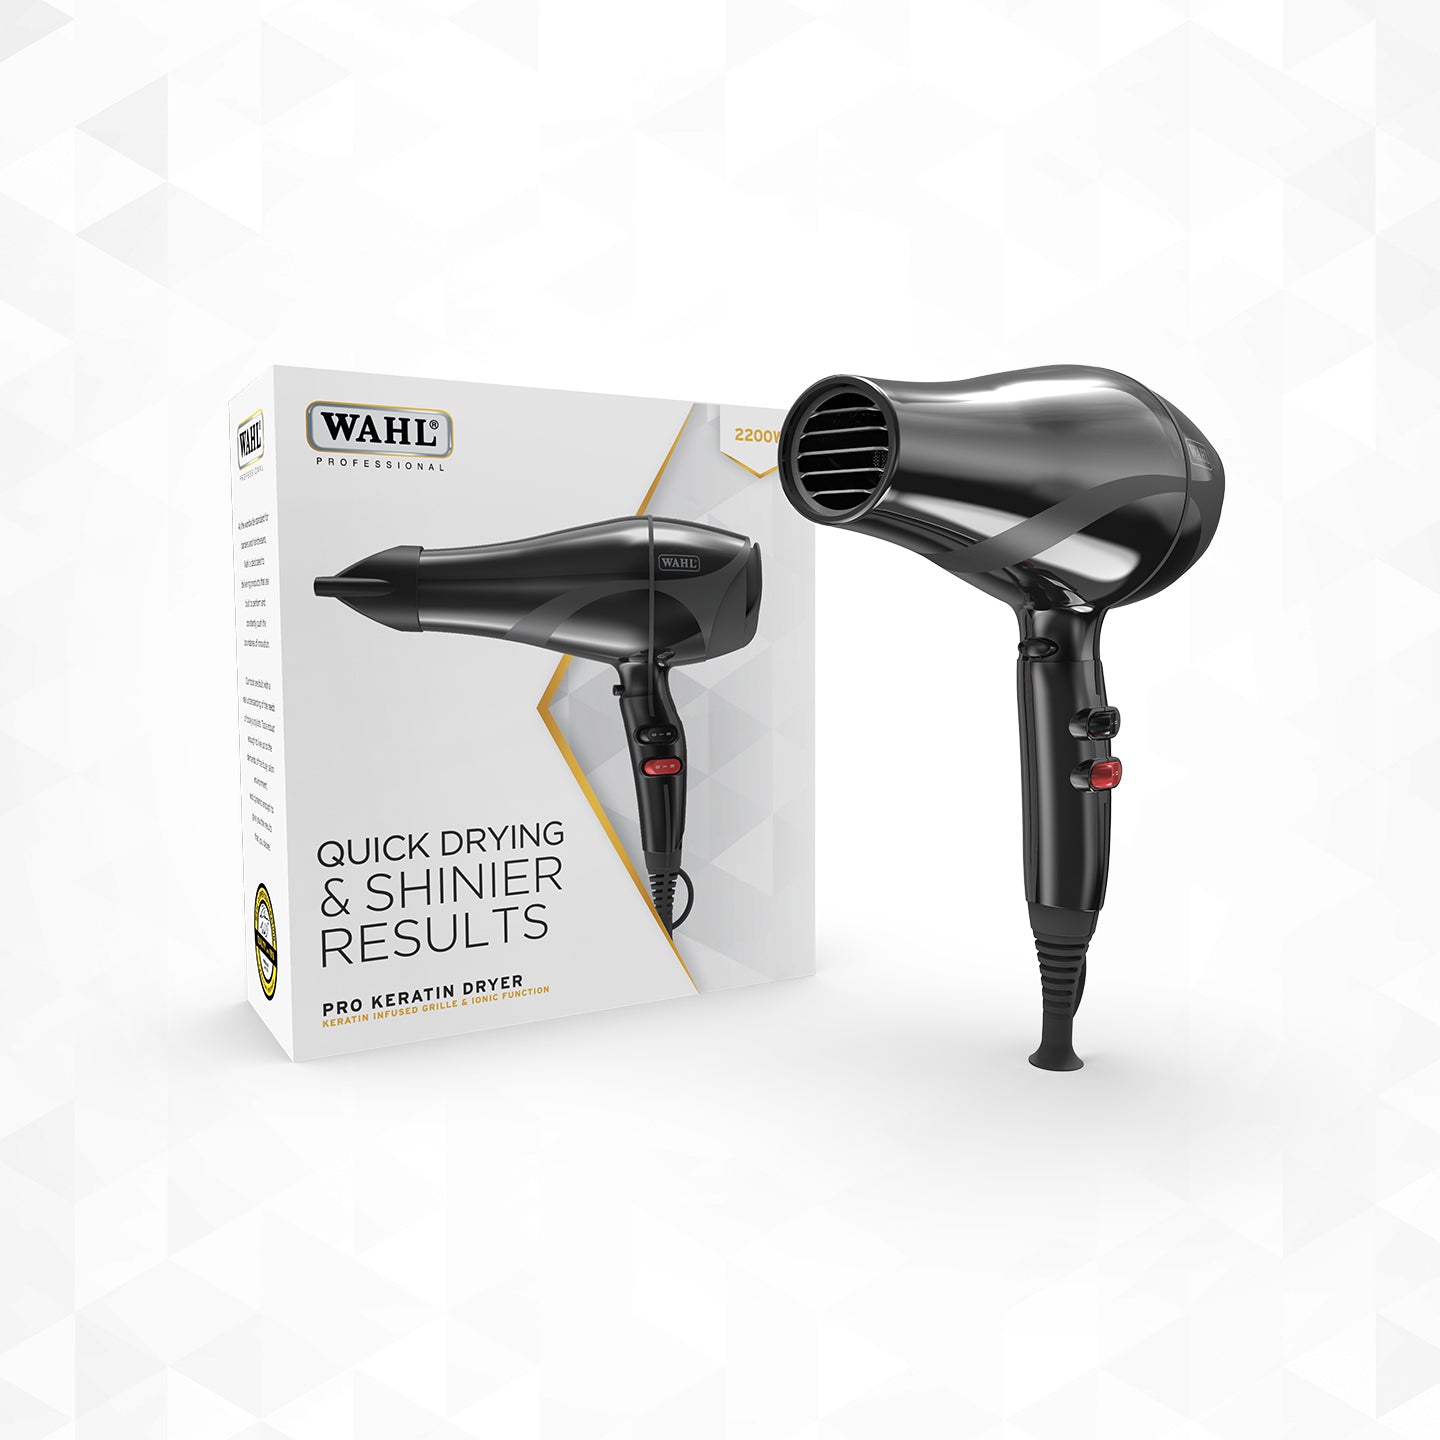 Wahl Pro Keratin Dryer - Ultimate Hair and Beauty